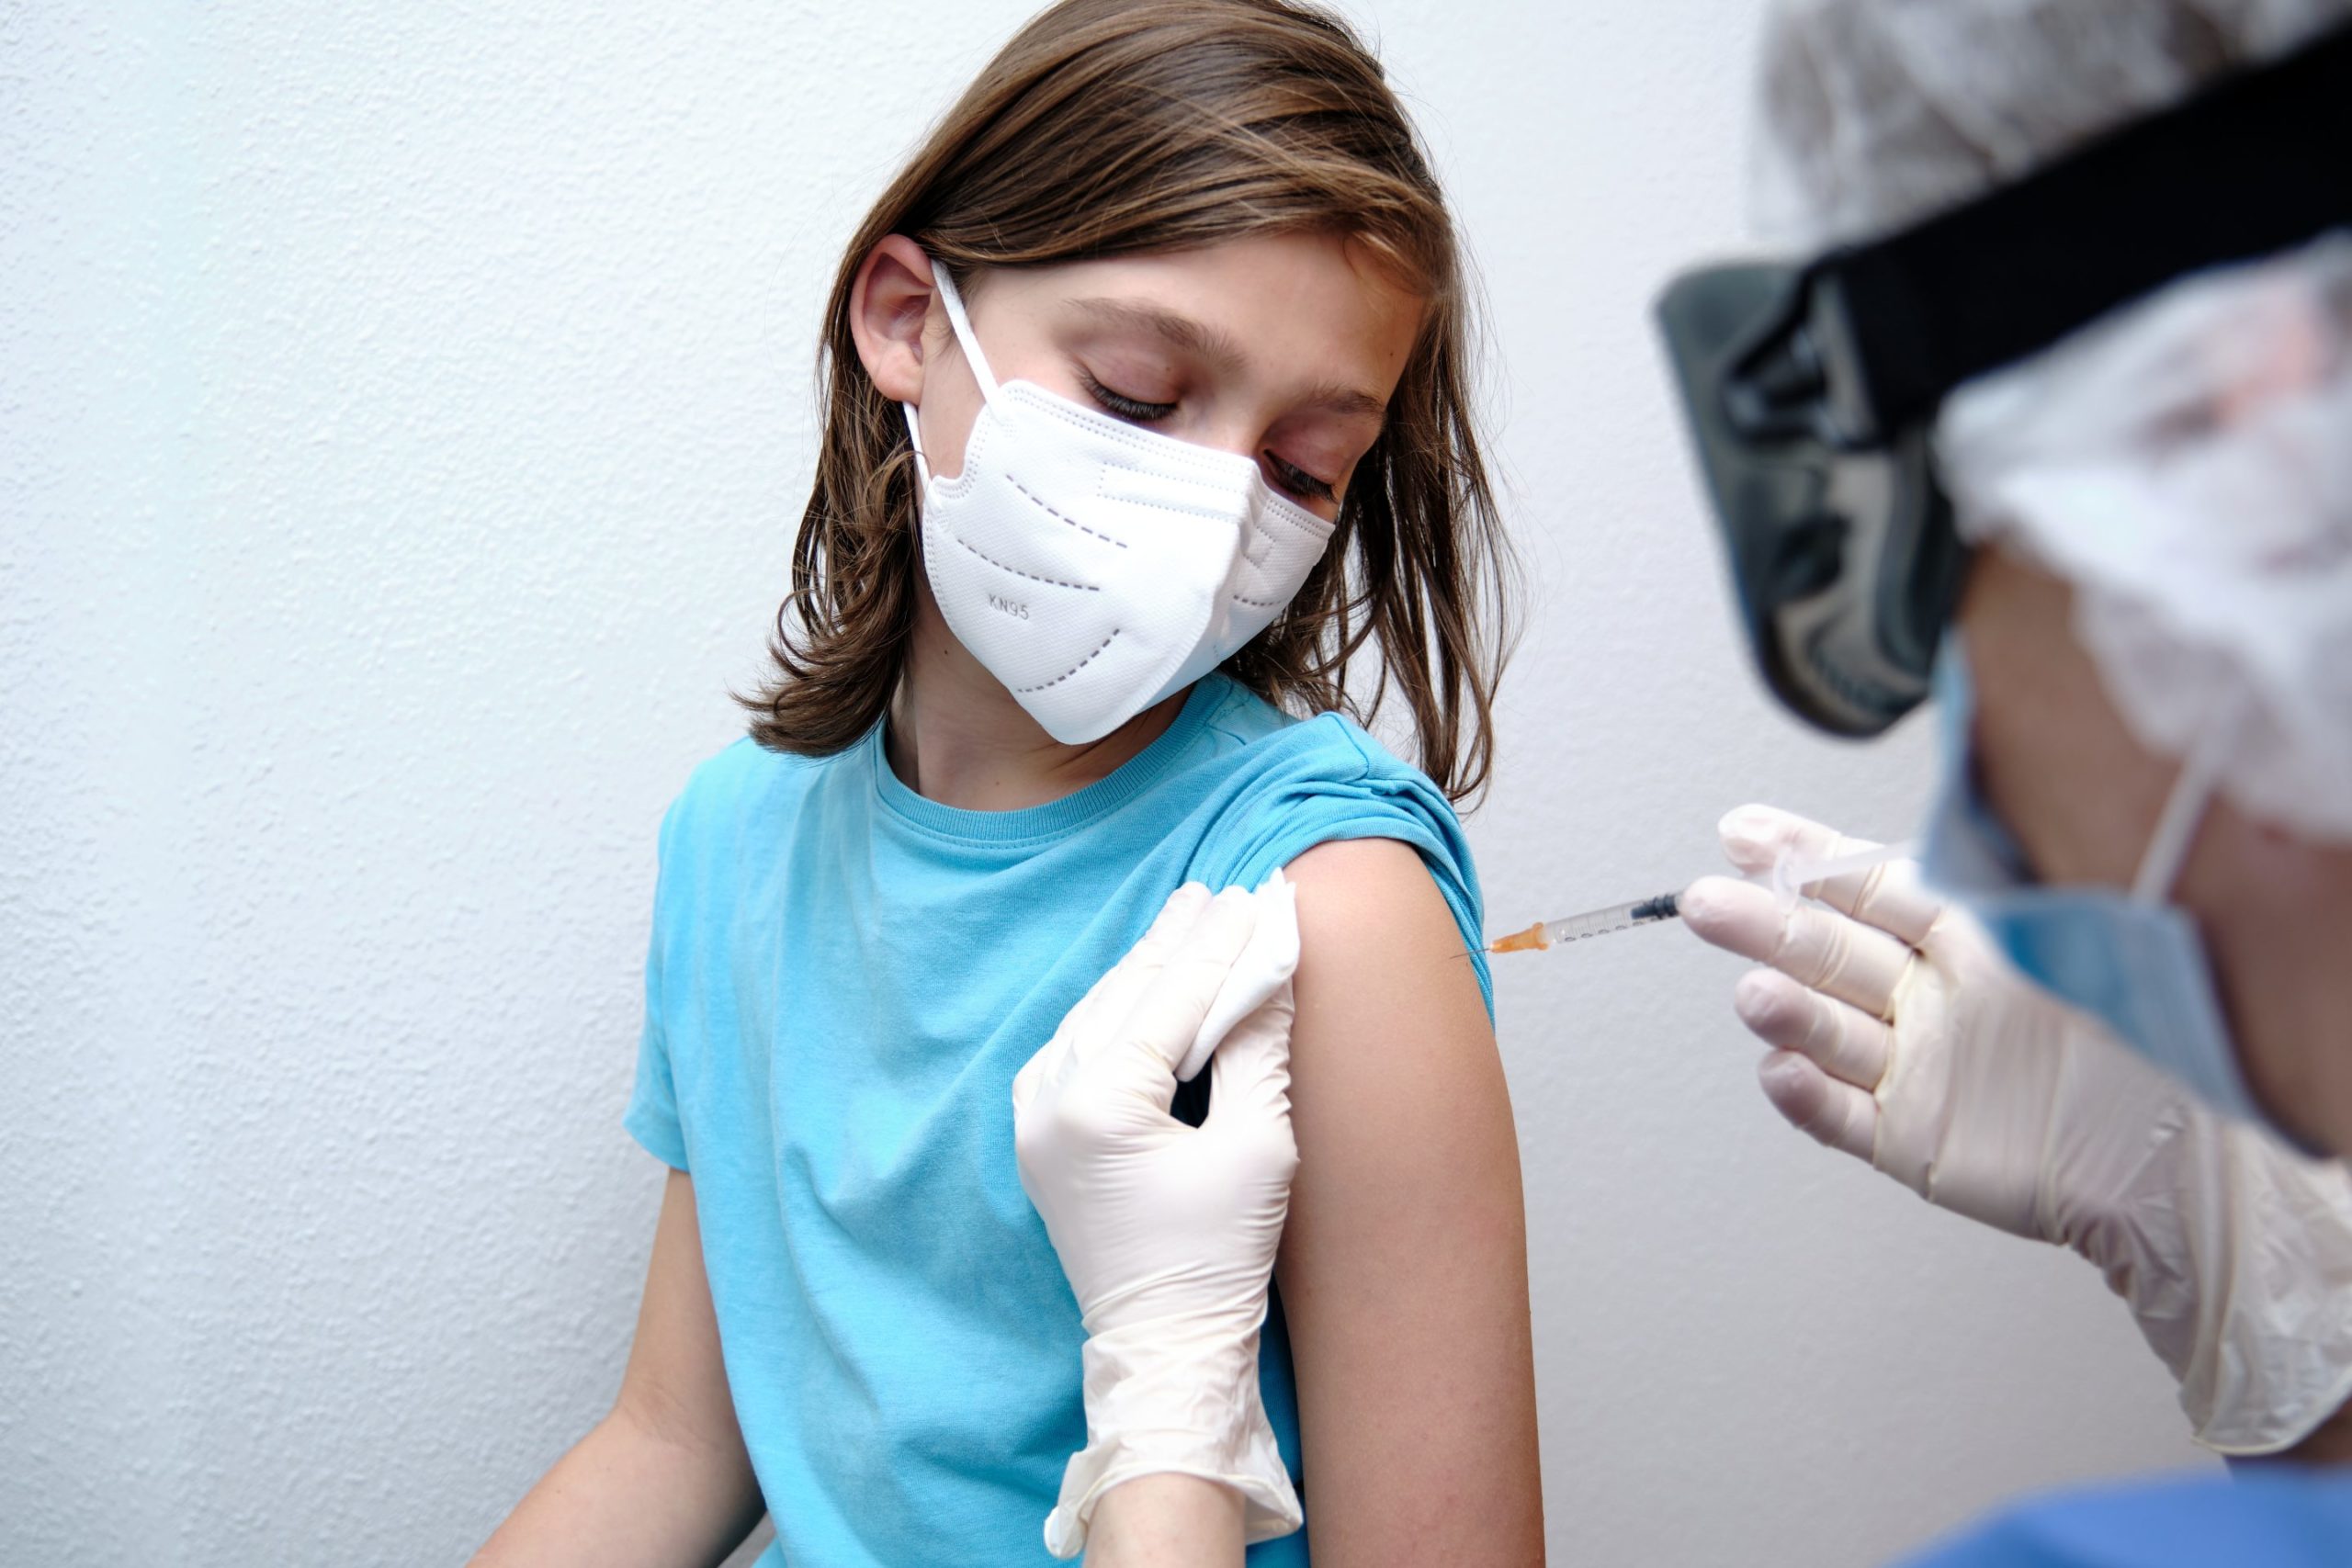 LA County could start vaccinating children aged 5-11 as early as today - The US Armenians